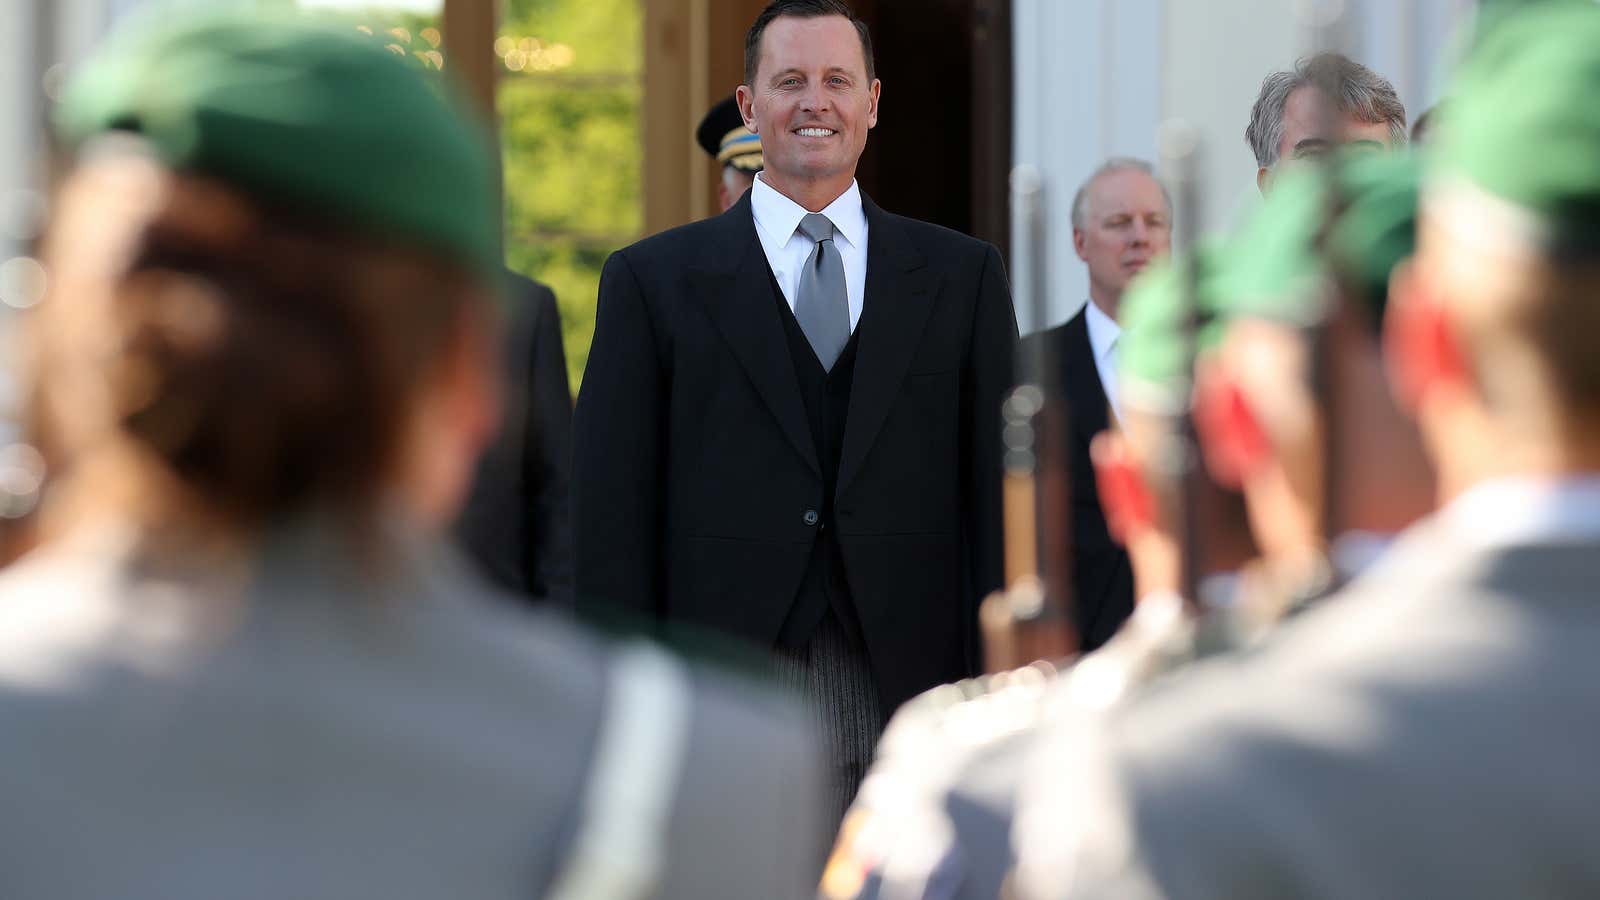 Richard Grenell was sworn in on May 8.